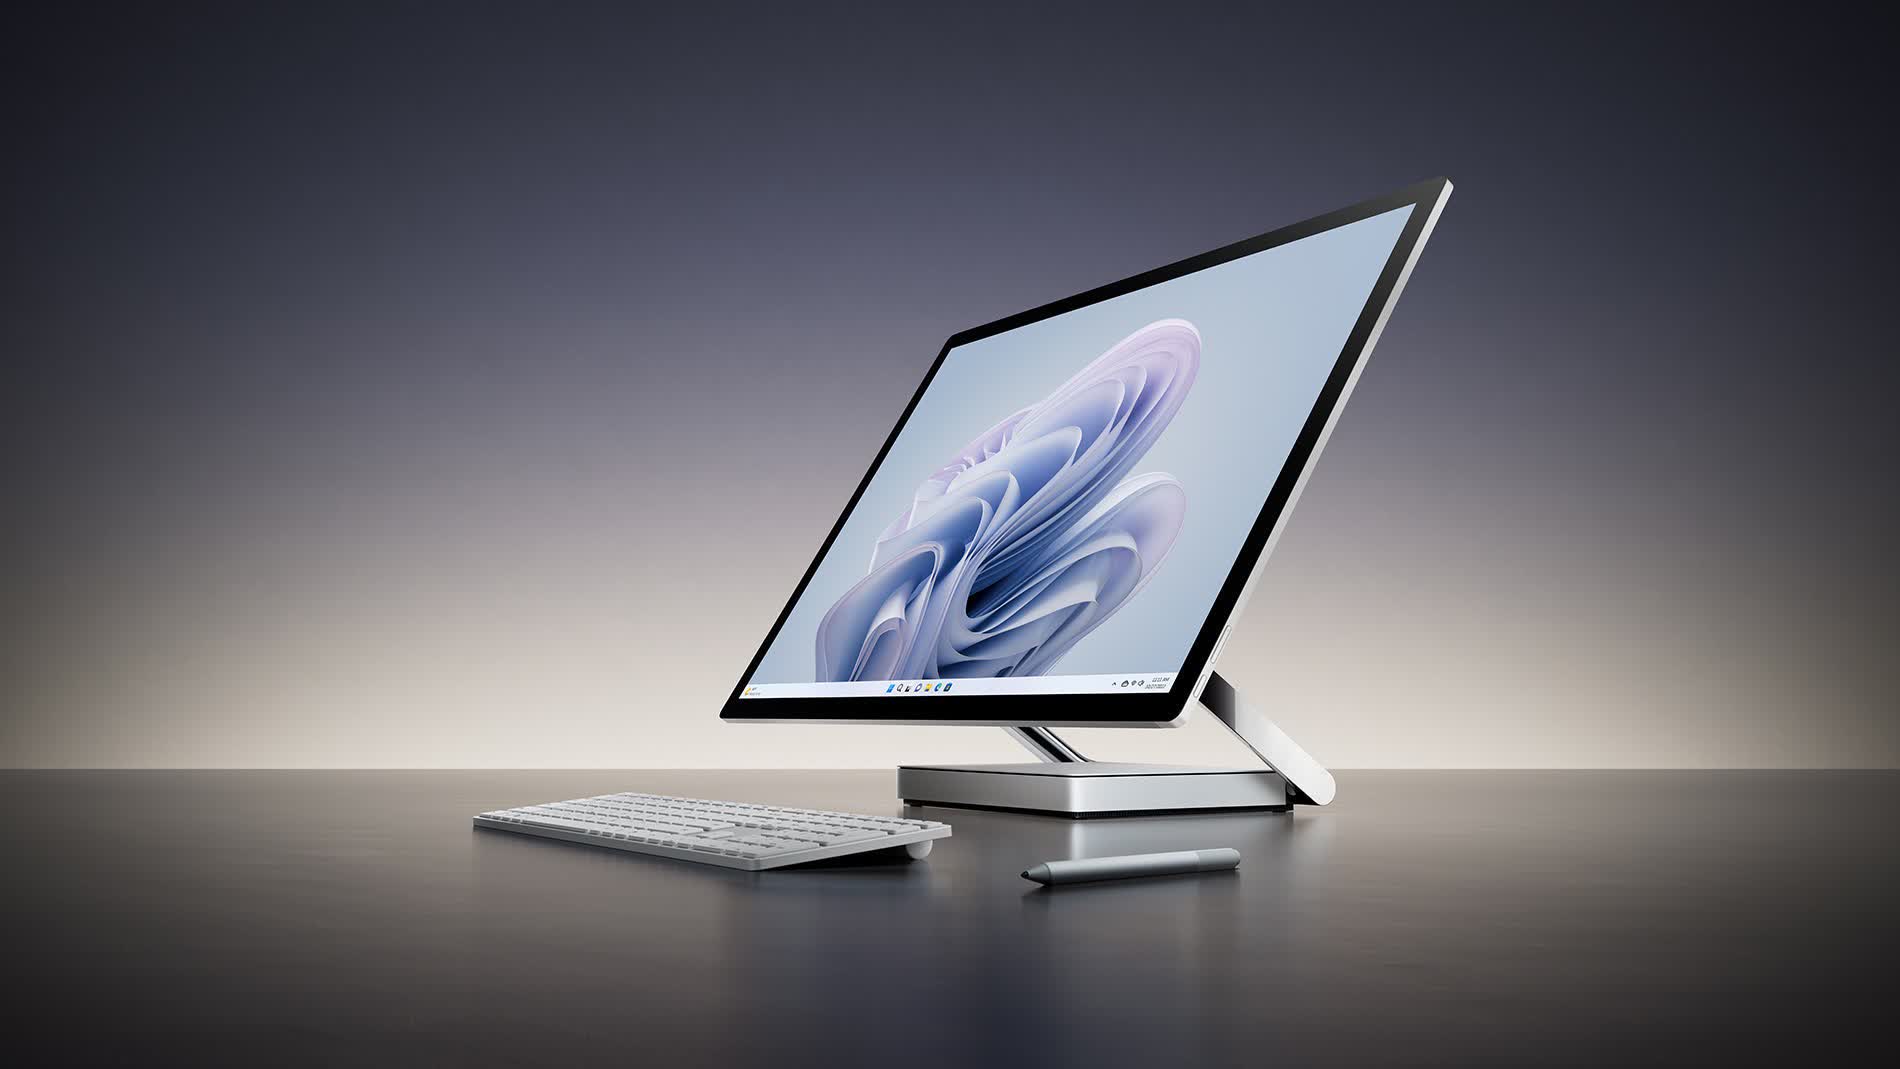 Microsoft unveils updated Surface Studio 2+ with RTX 3060 graphics